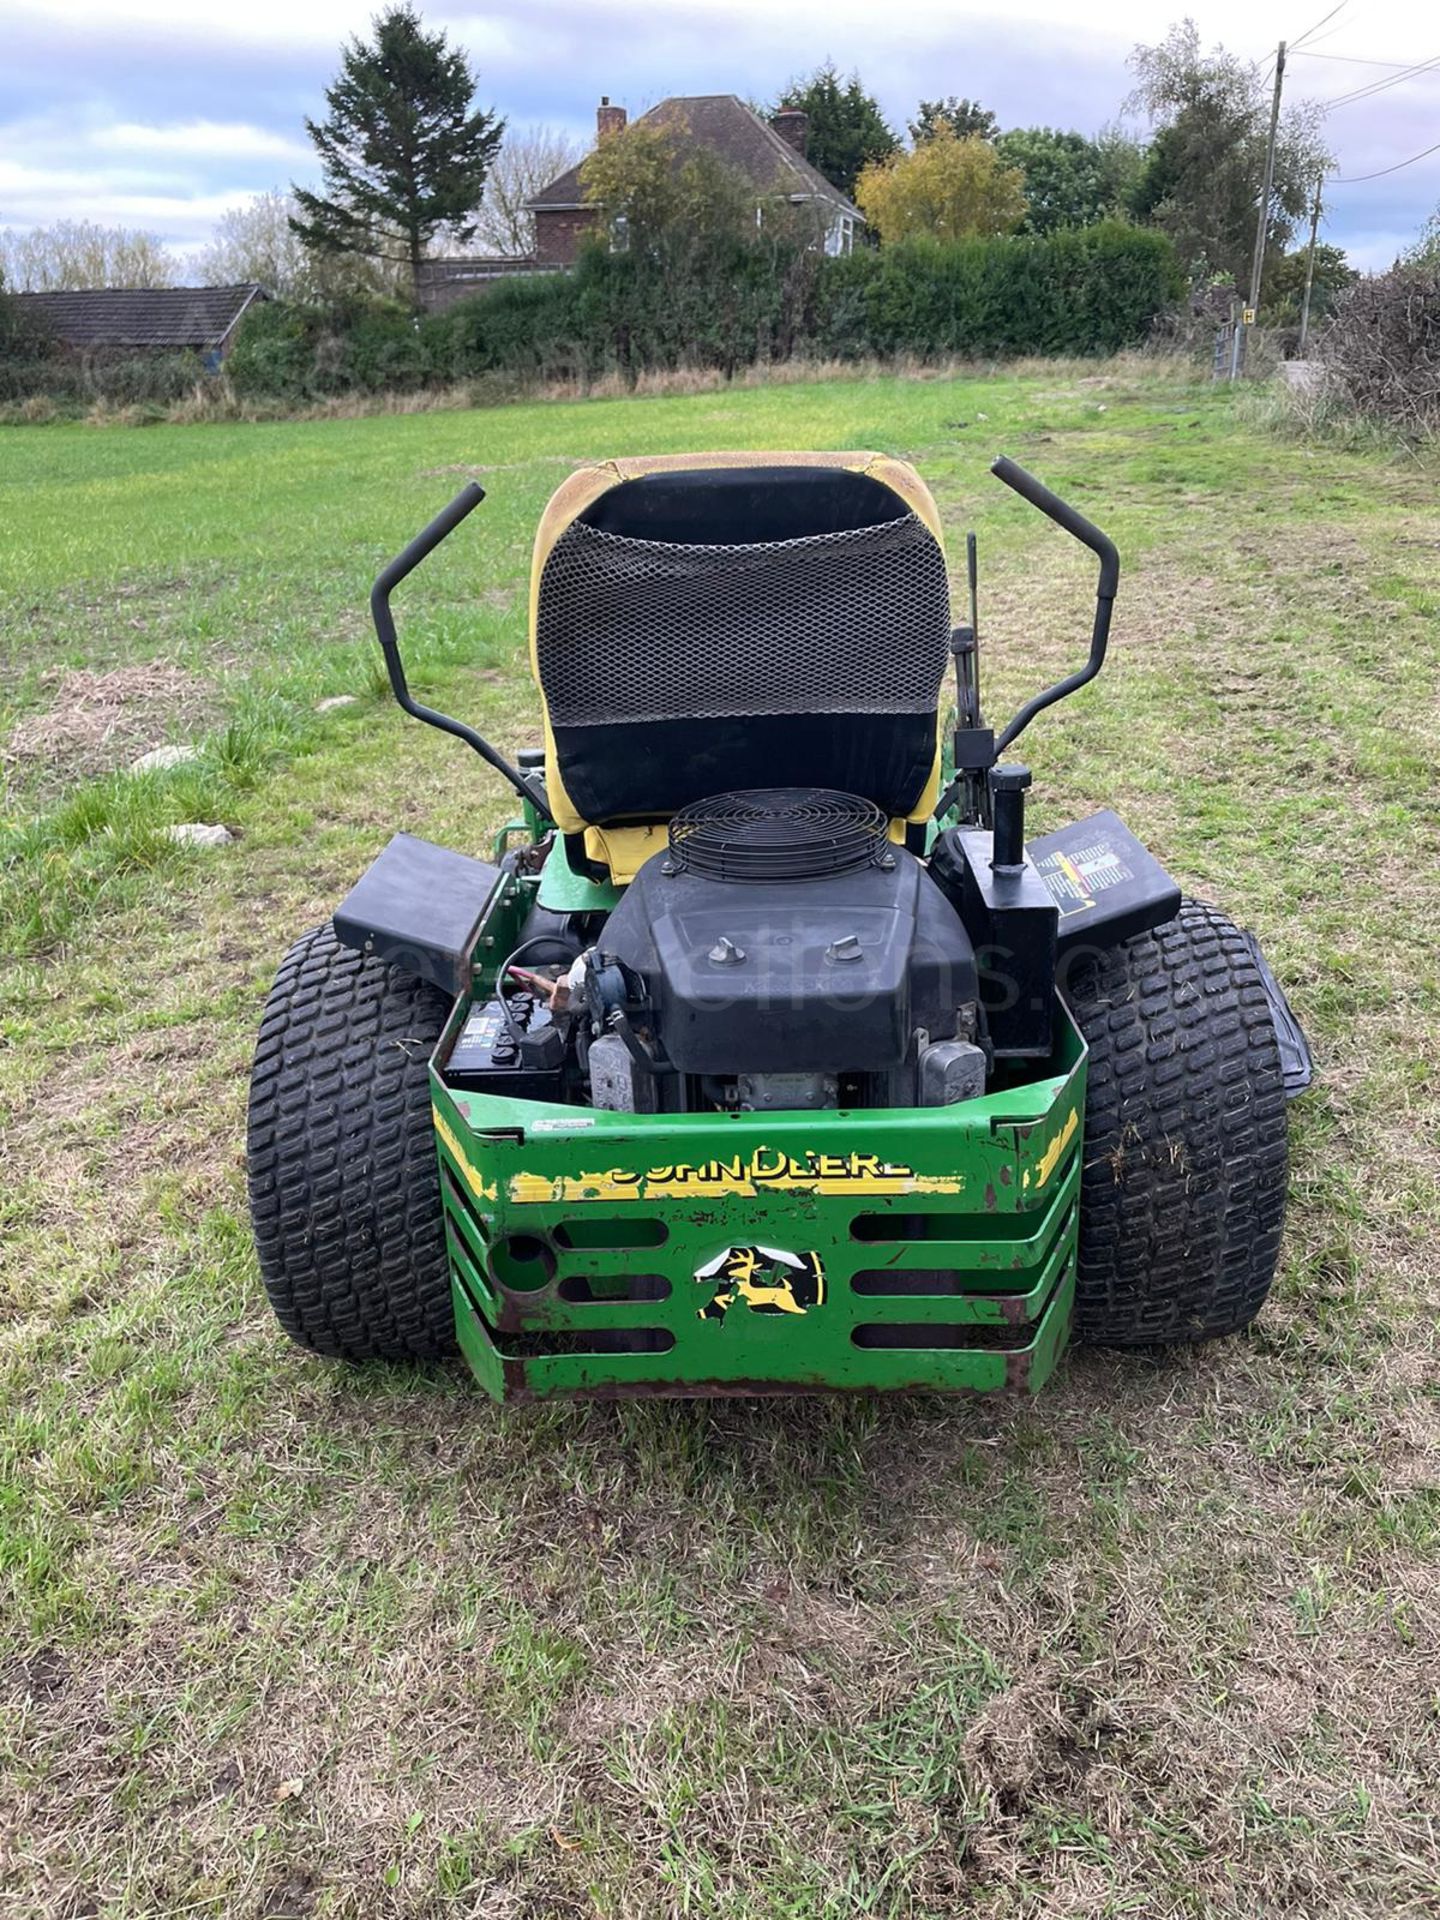 JOHN DEERE 717 Z-TRAK ZERO TURN RIDE ON LAWN MOWER, RUNS DRIVES AND CUTS, SHOWING A LOW 336 HOURS - Image 12 of 18